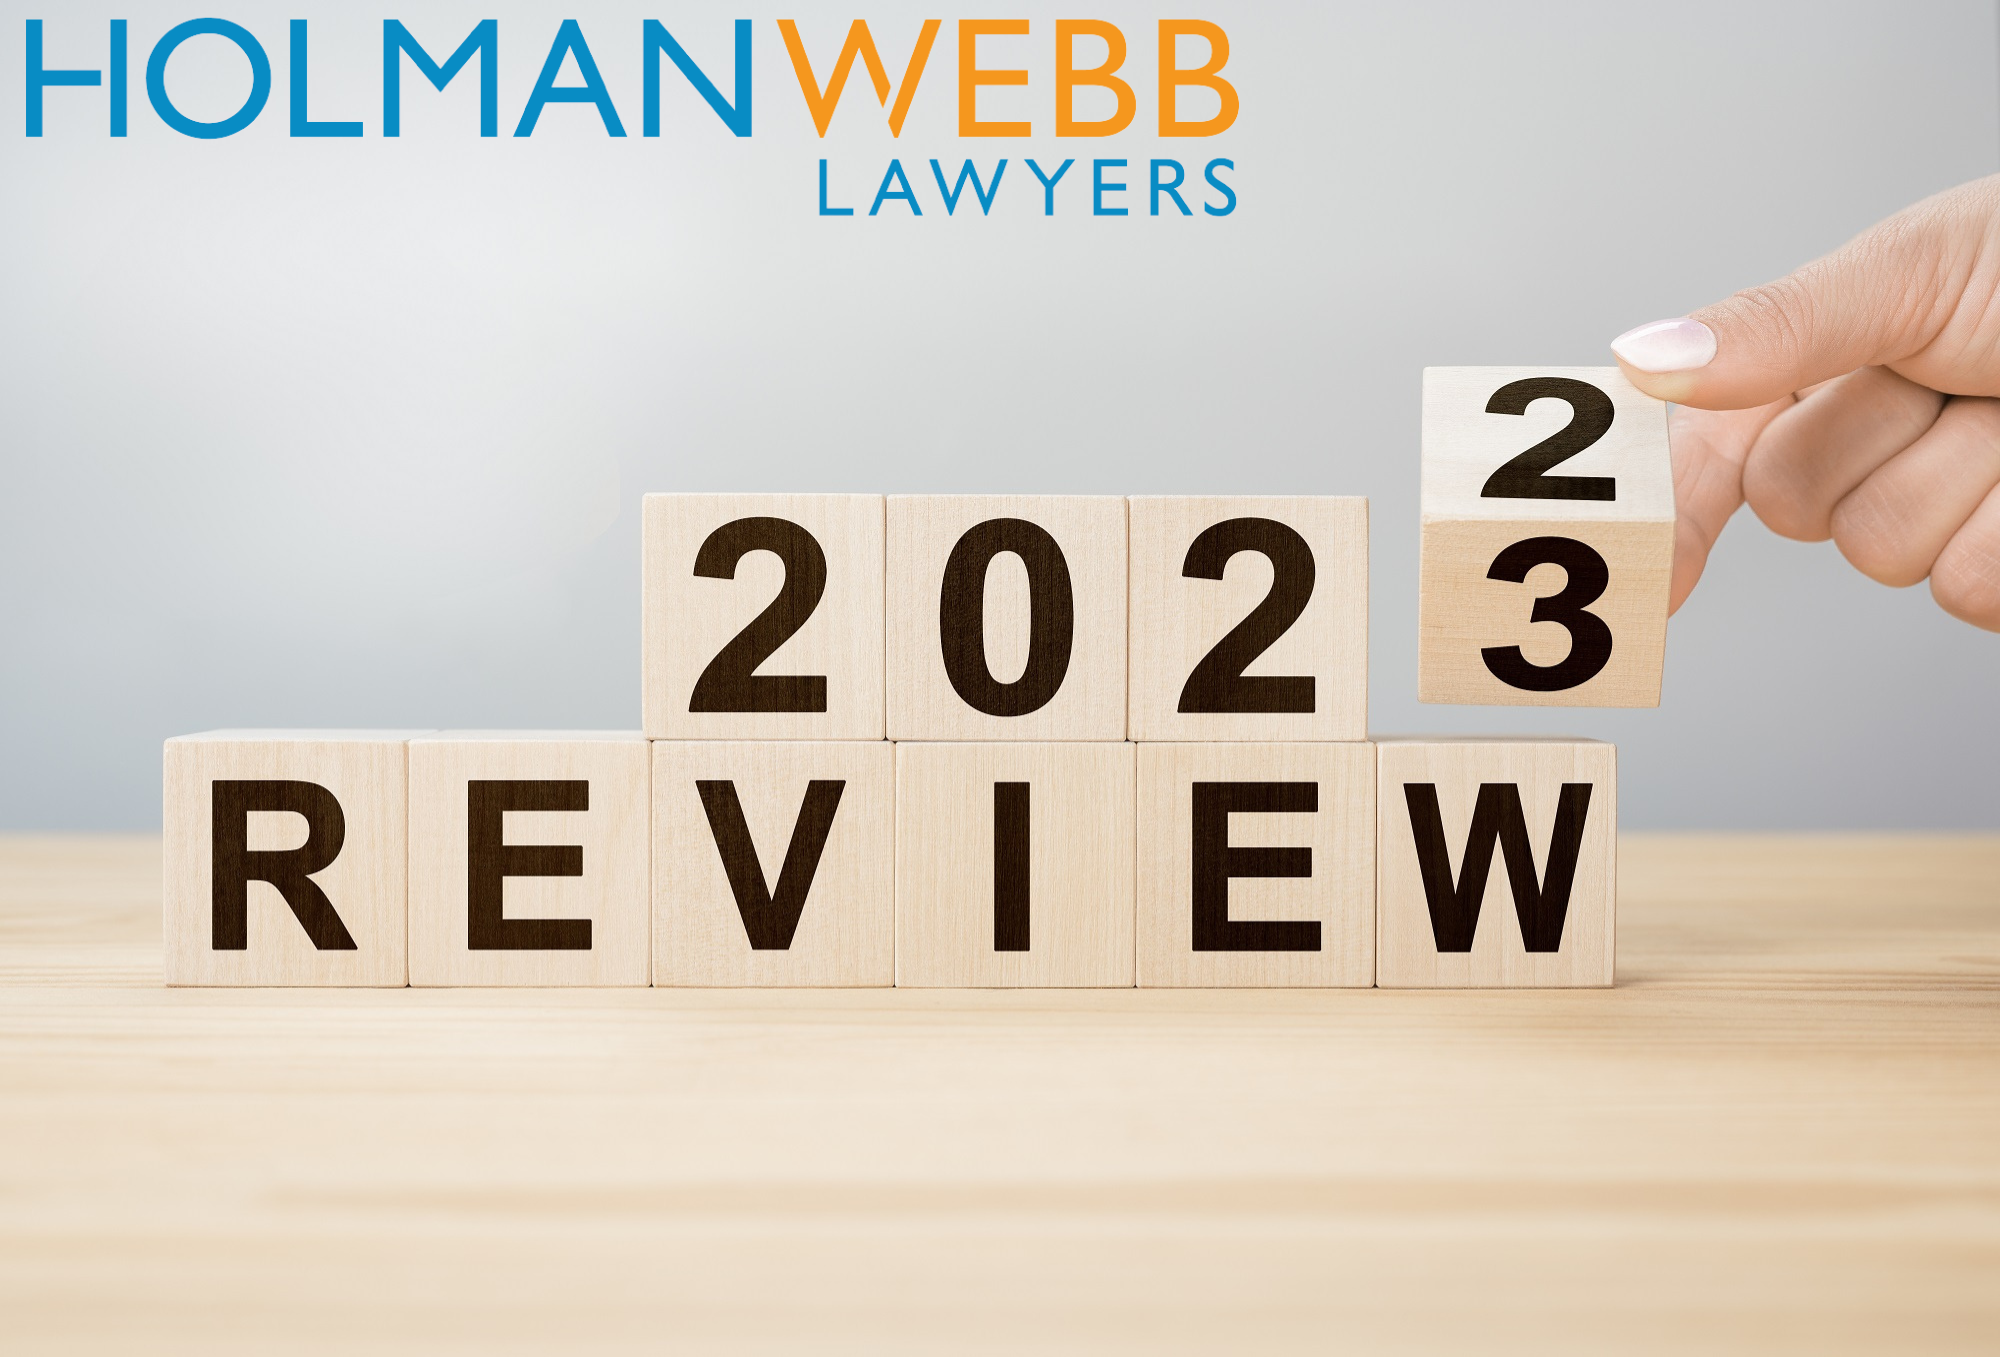 Insurance Webinar Recording: 2022 - A Year in Review